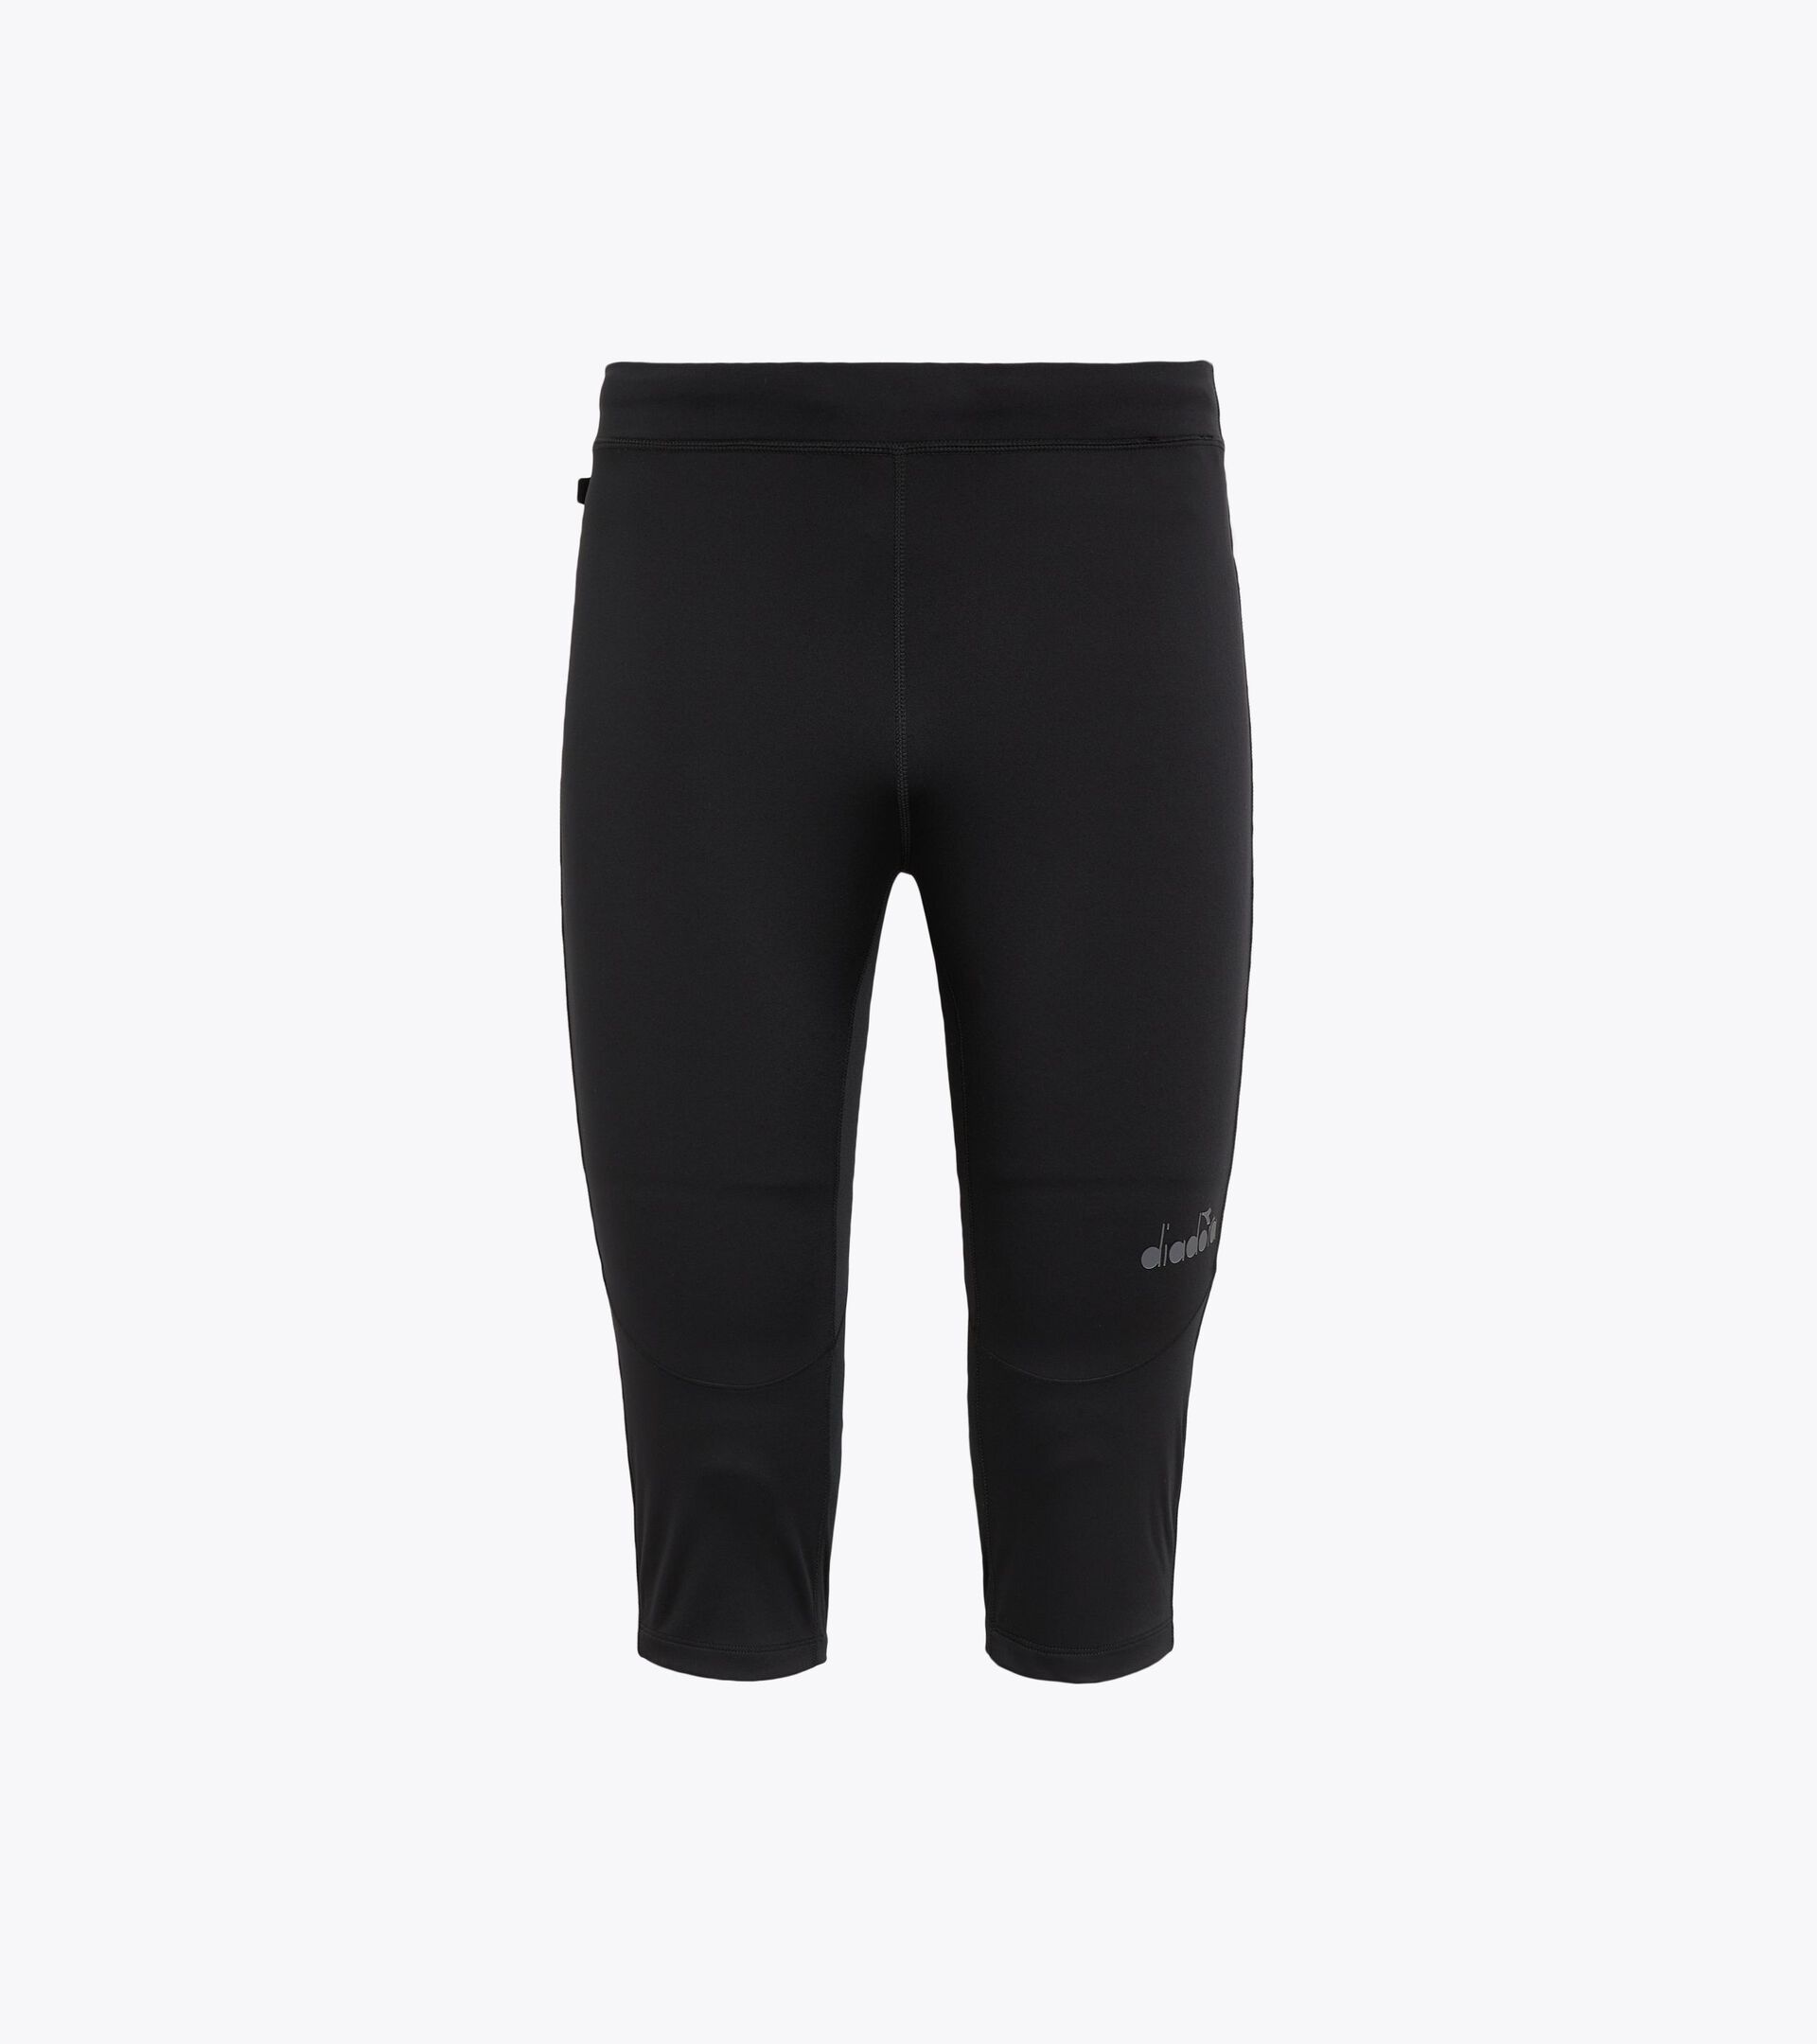 VANSYDICAL Quick Dry Compression Running Basketball Tights 3 4 For Men  Polyester Sports Leggings With Letter Design For Gym And Fitness X0824 From  Fashion_official01, $11.89